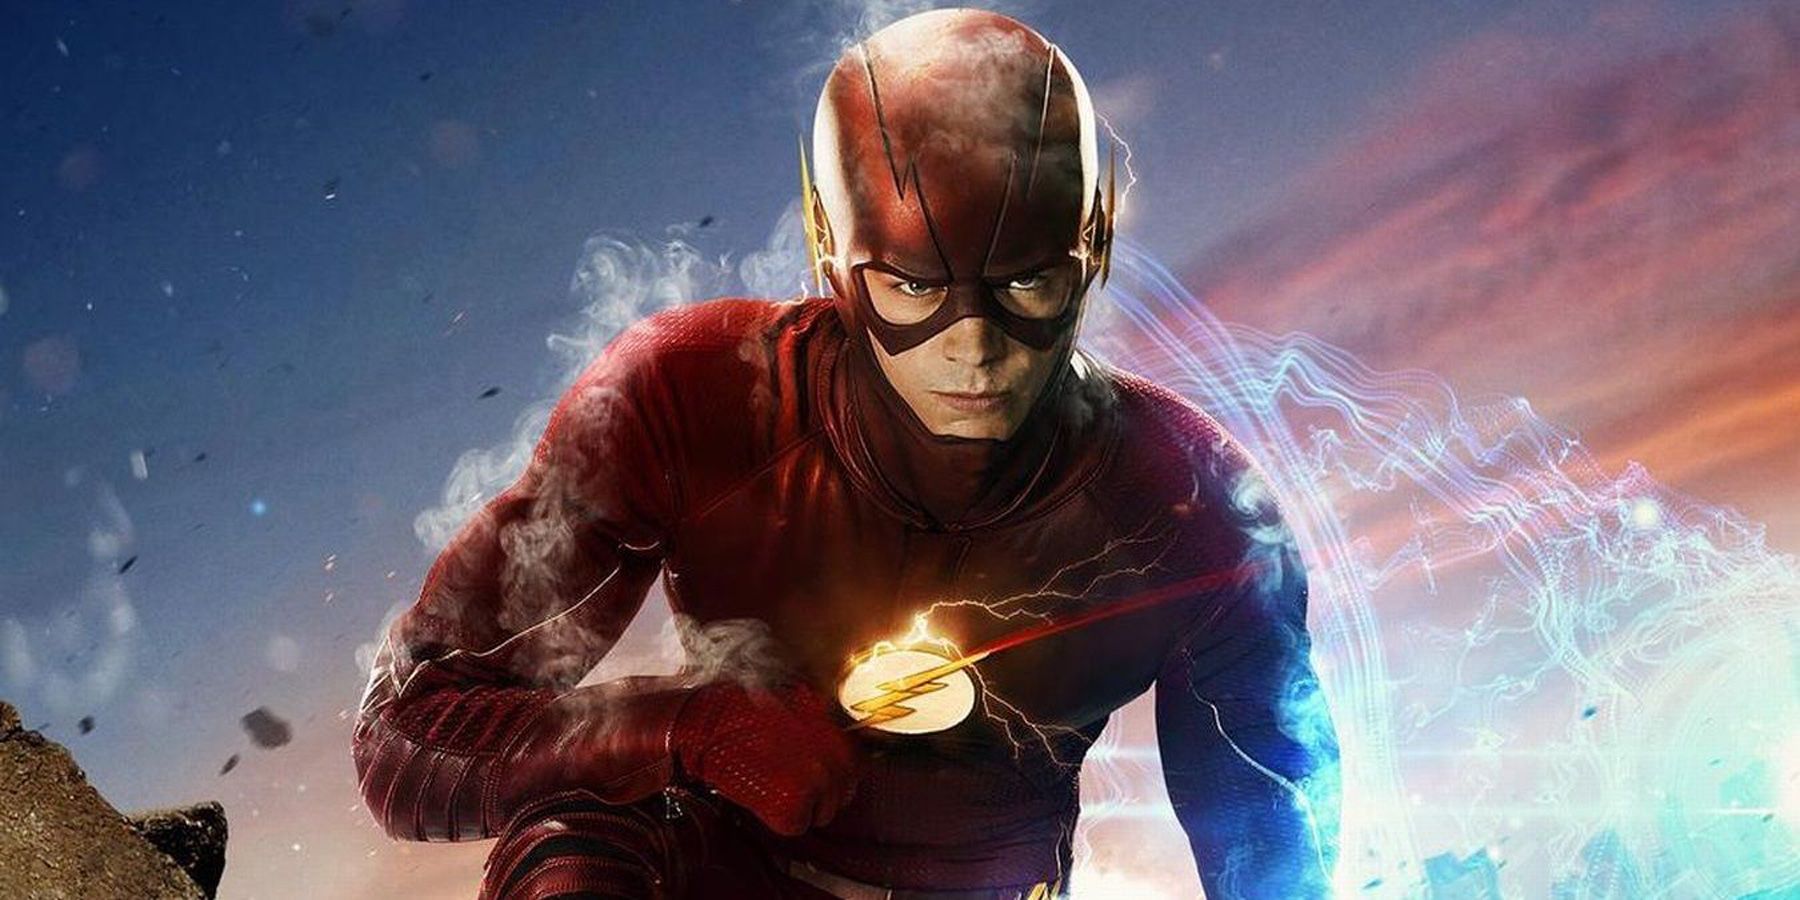 The Flash S4 Breakdowns for Elongated Man, Thinker & More